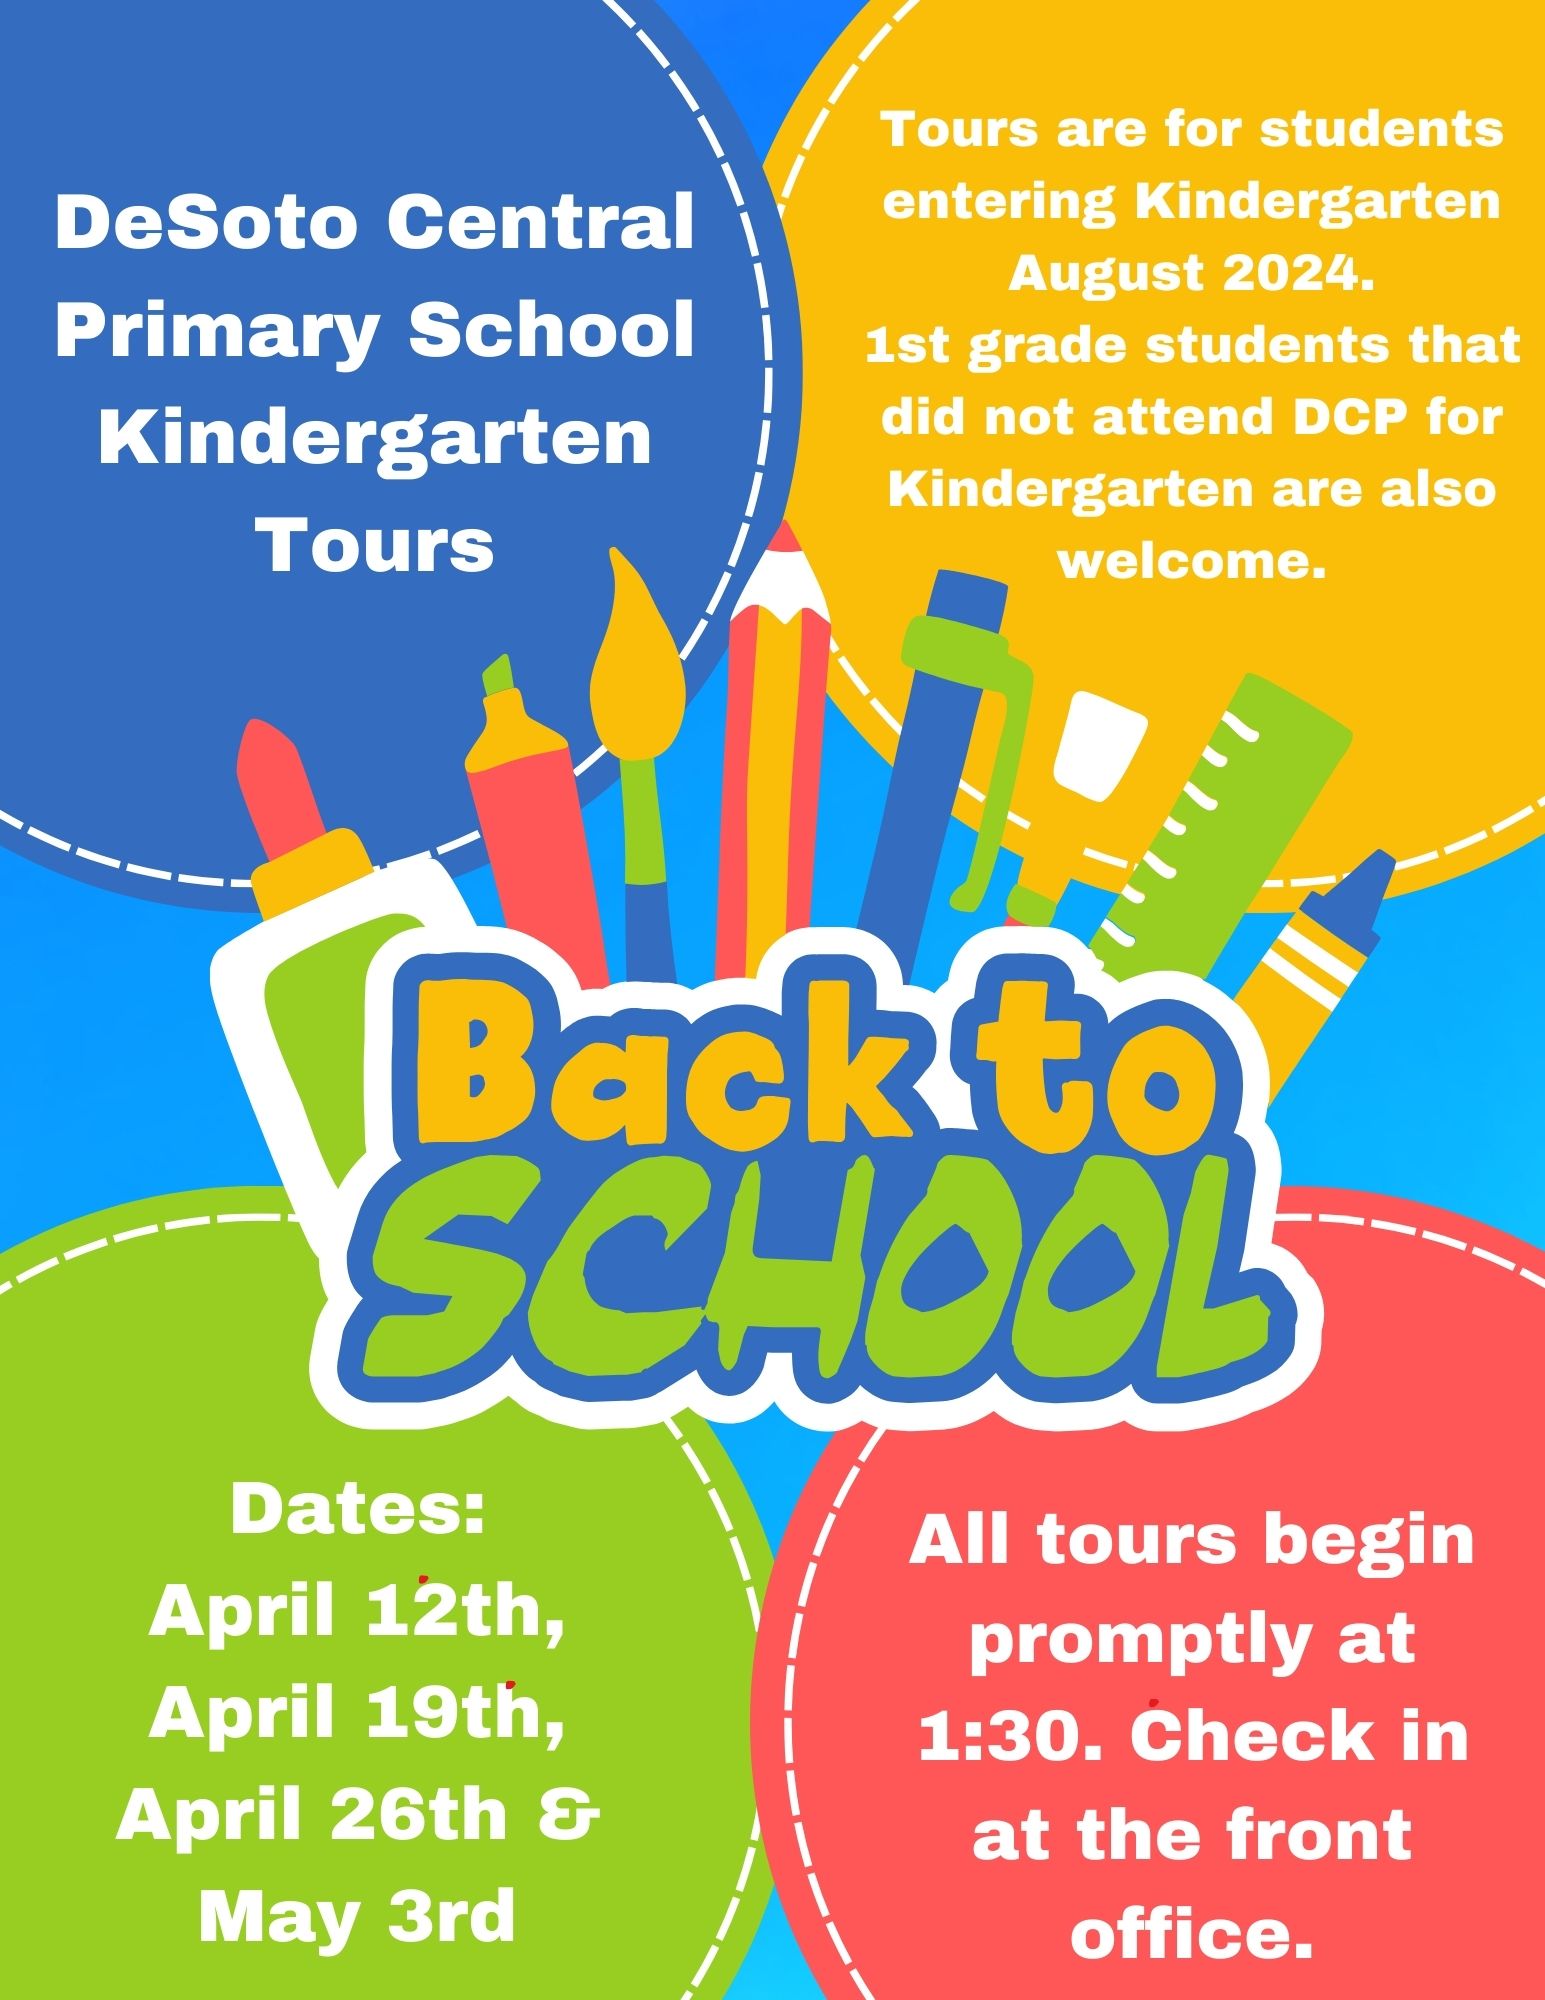 DCPS Kindergarten Tours Tours are for students entering K August 2024. 1st grade students that did not attend DCPS for Kindergarten are also welcome. Tour Dates: April 12, April 19, April 26 and May 3.  All tours begin promptly at 1:30 pm - Check in at the front office.